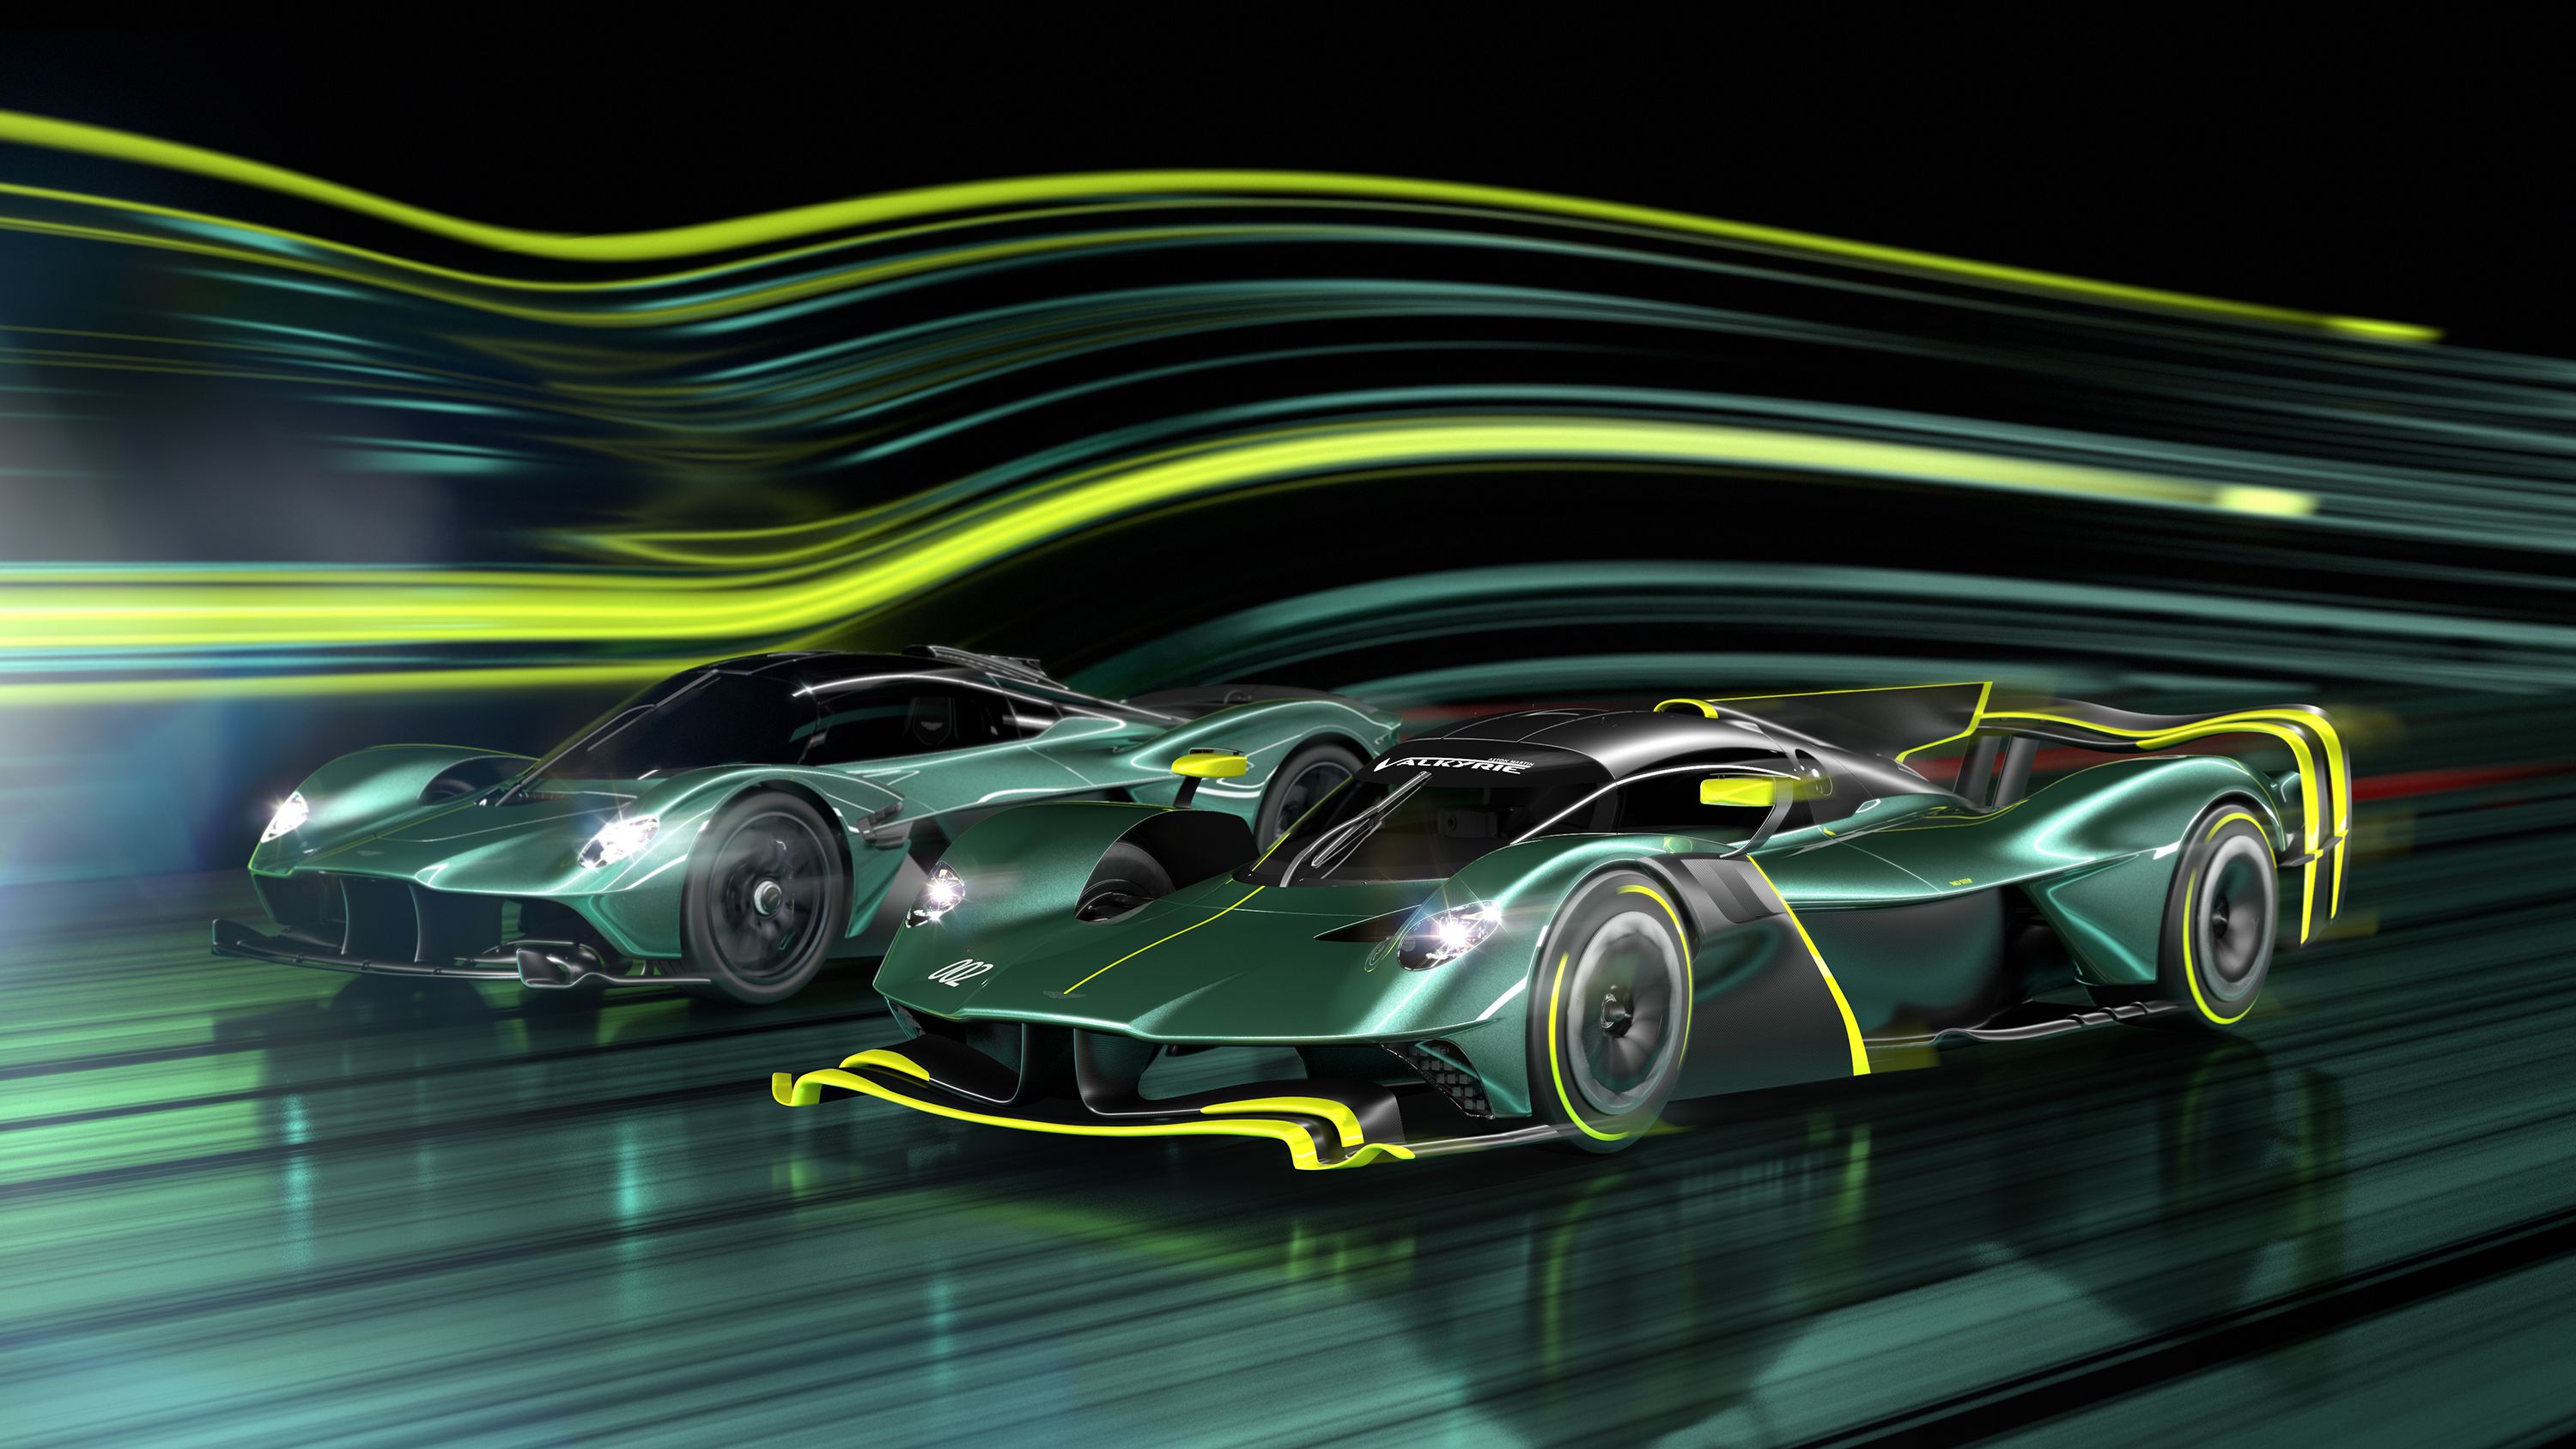 Aston Martin Valkyrie And Valkyrie AMR Pro, front